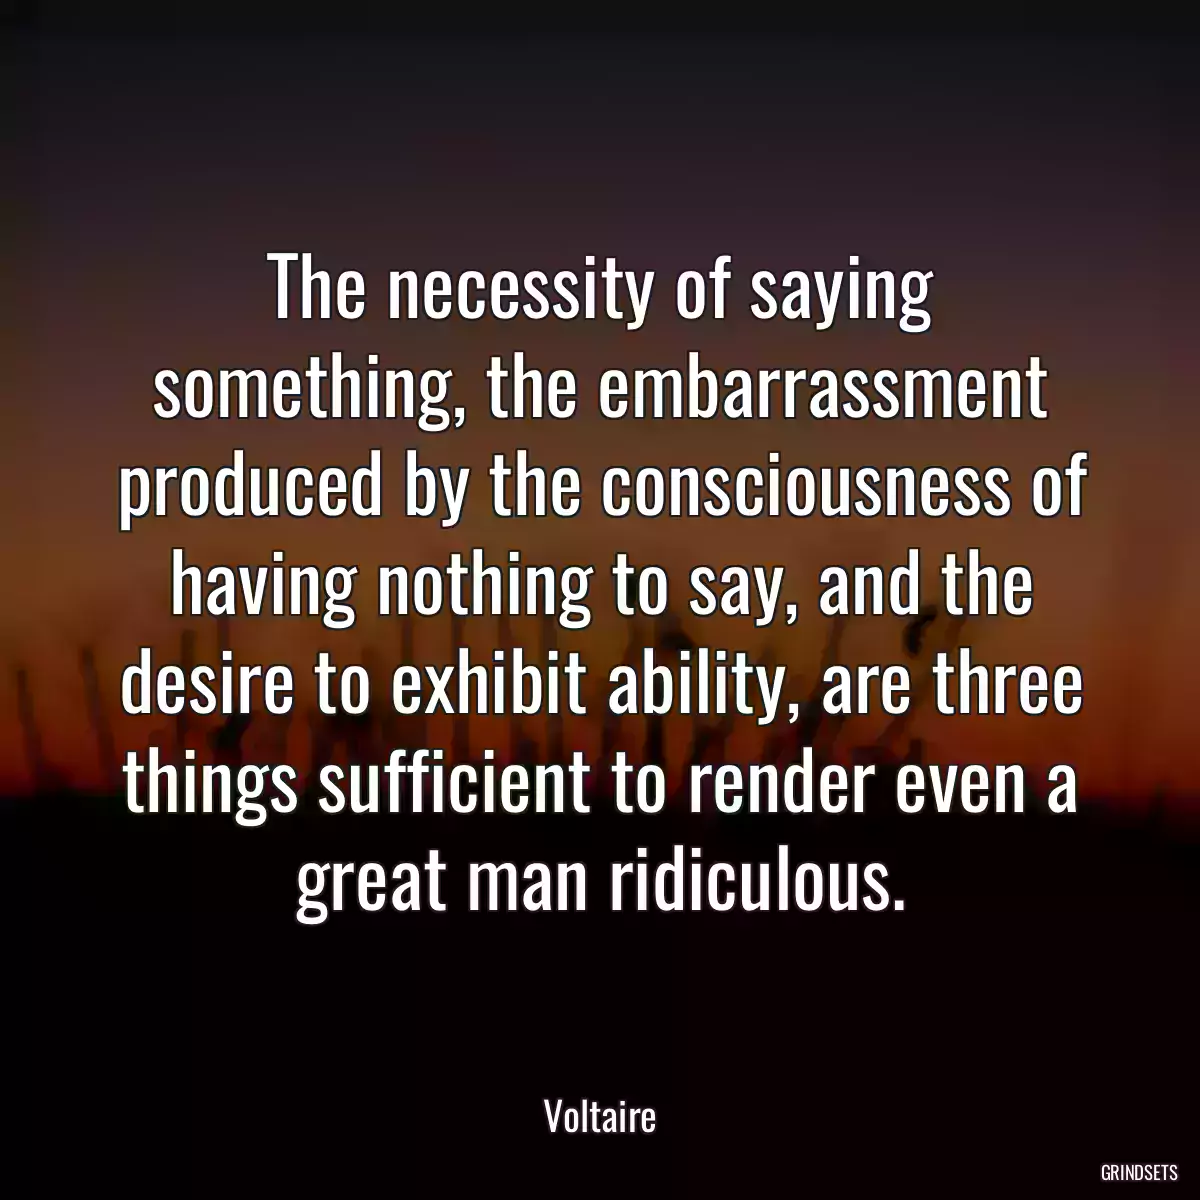 The necessity of saying something, the embarrassment produced by the consciousness of having nothing to say, and the desire to exhibit ability, are three things sufficient to render even a great man ridiculous.